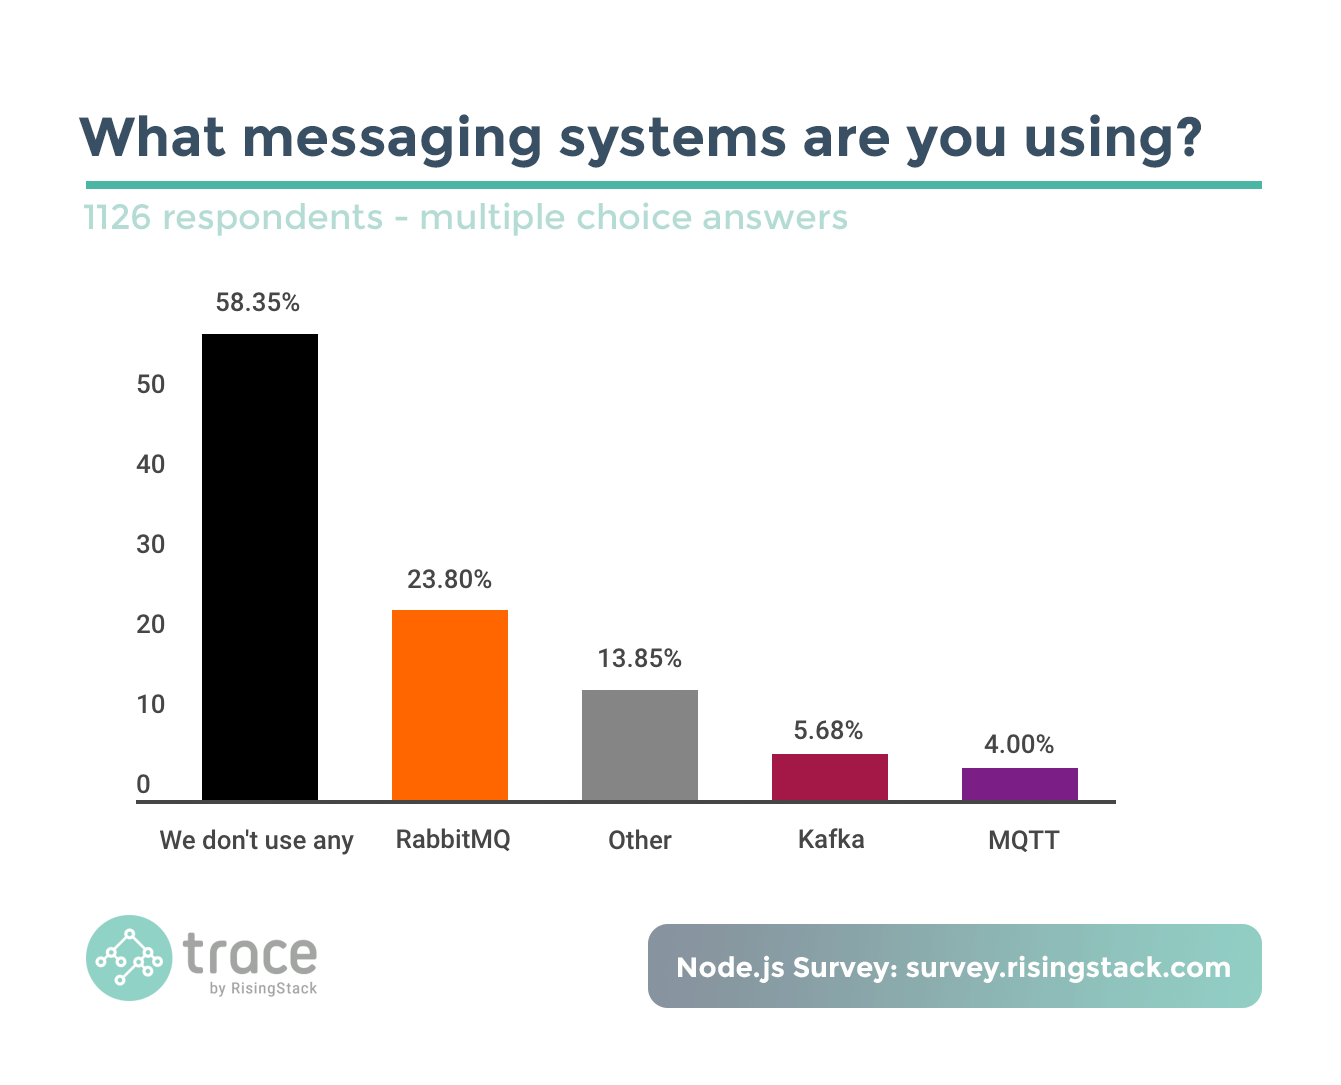 Node.js Survey - What messaging systems are you using? RabbitMQ wins.